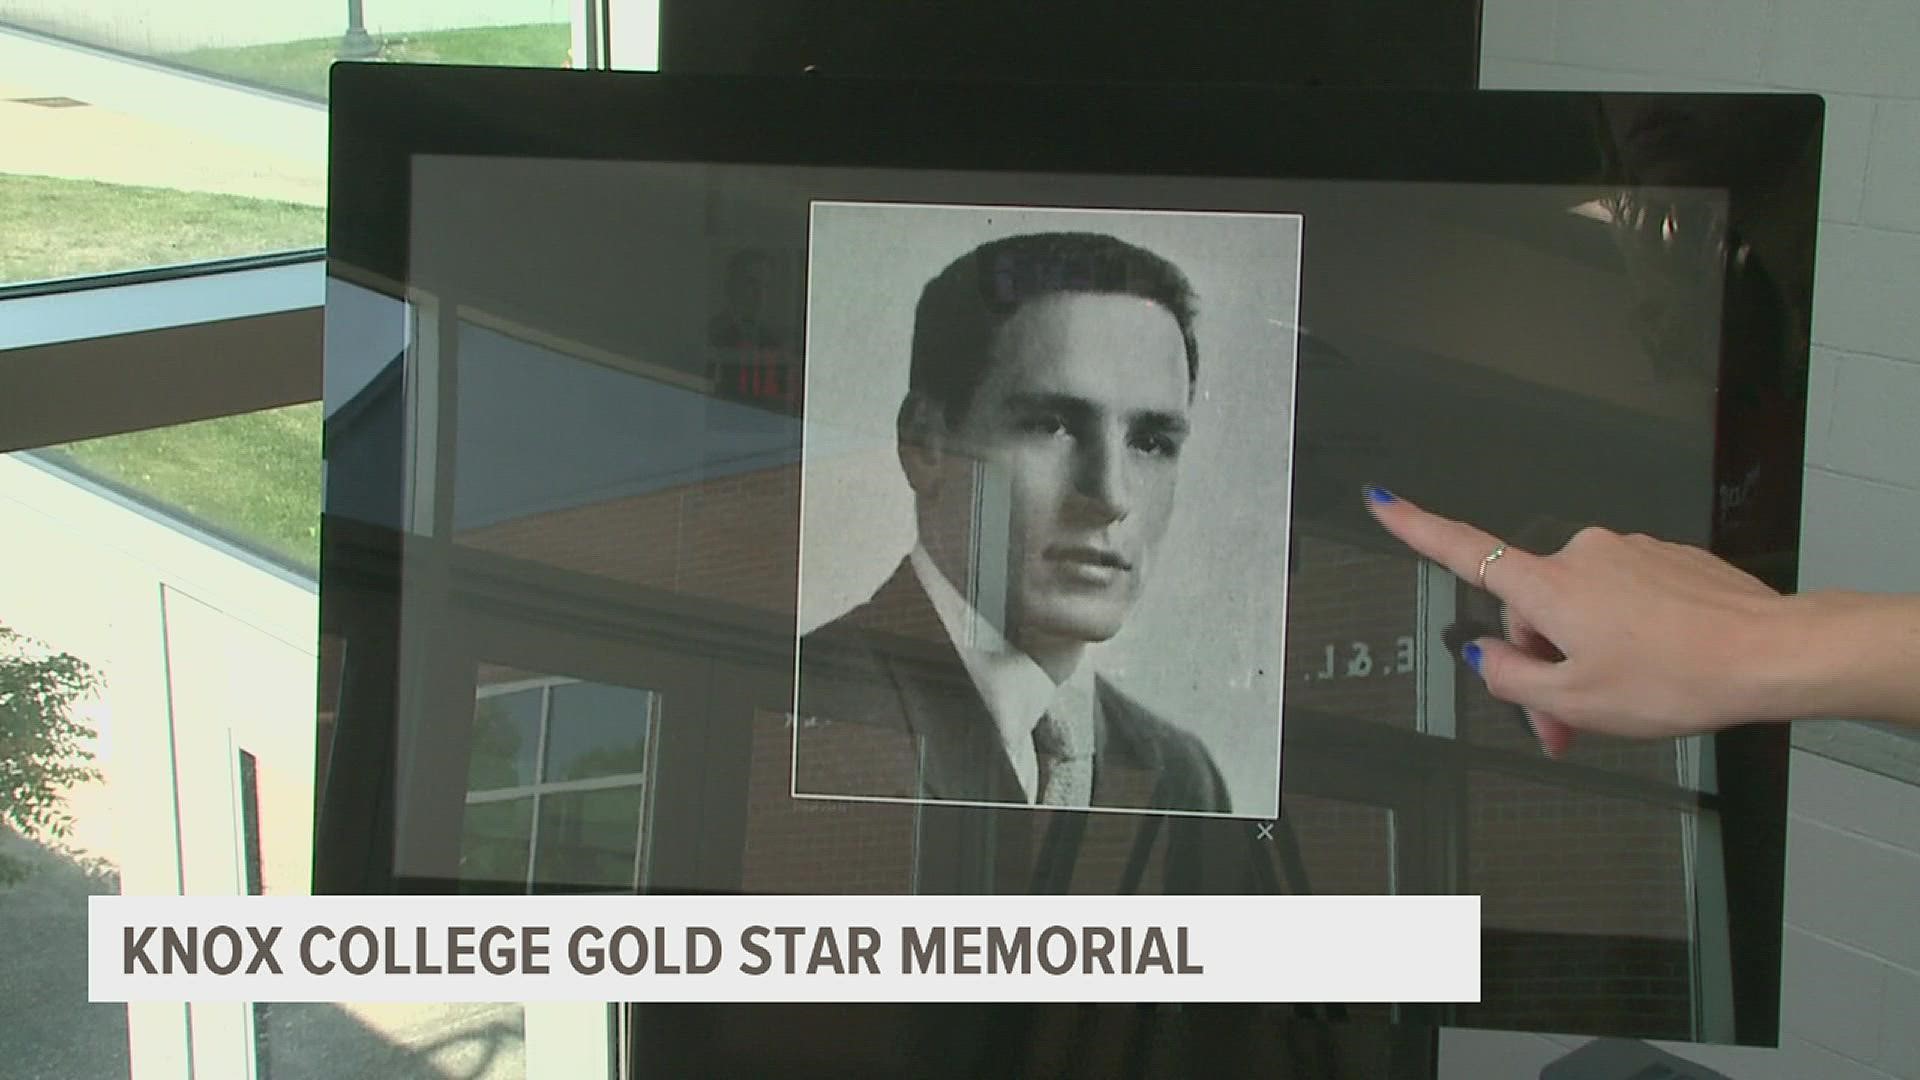 The 99 Lives Gold Star Memorial at the Knox College in Galesburg honors former students and staff members who died in the line of duty.